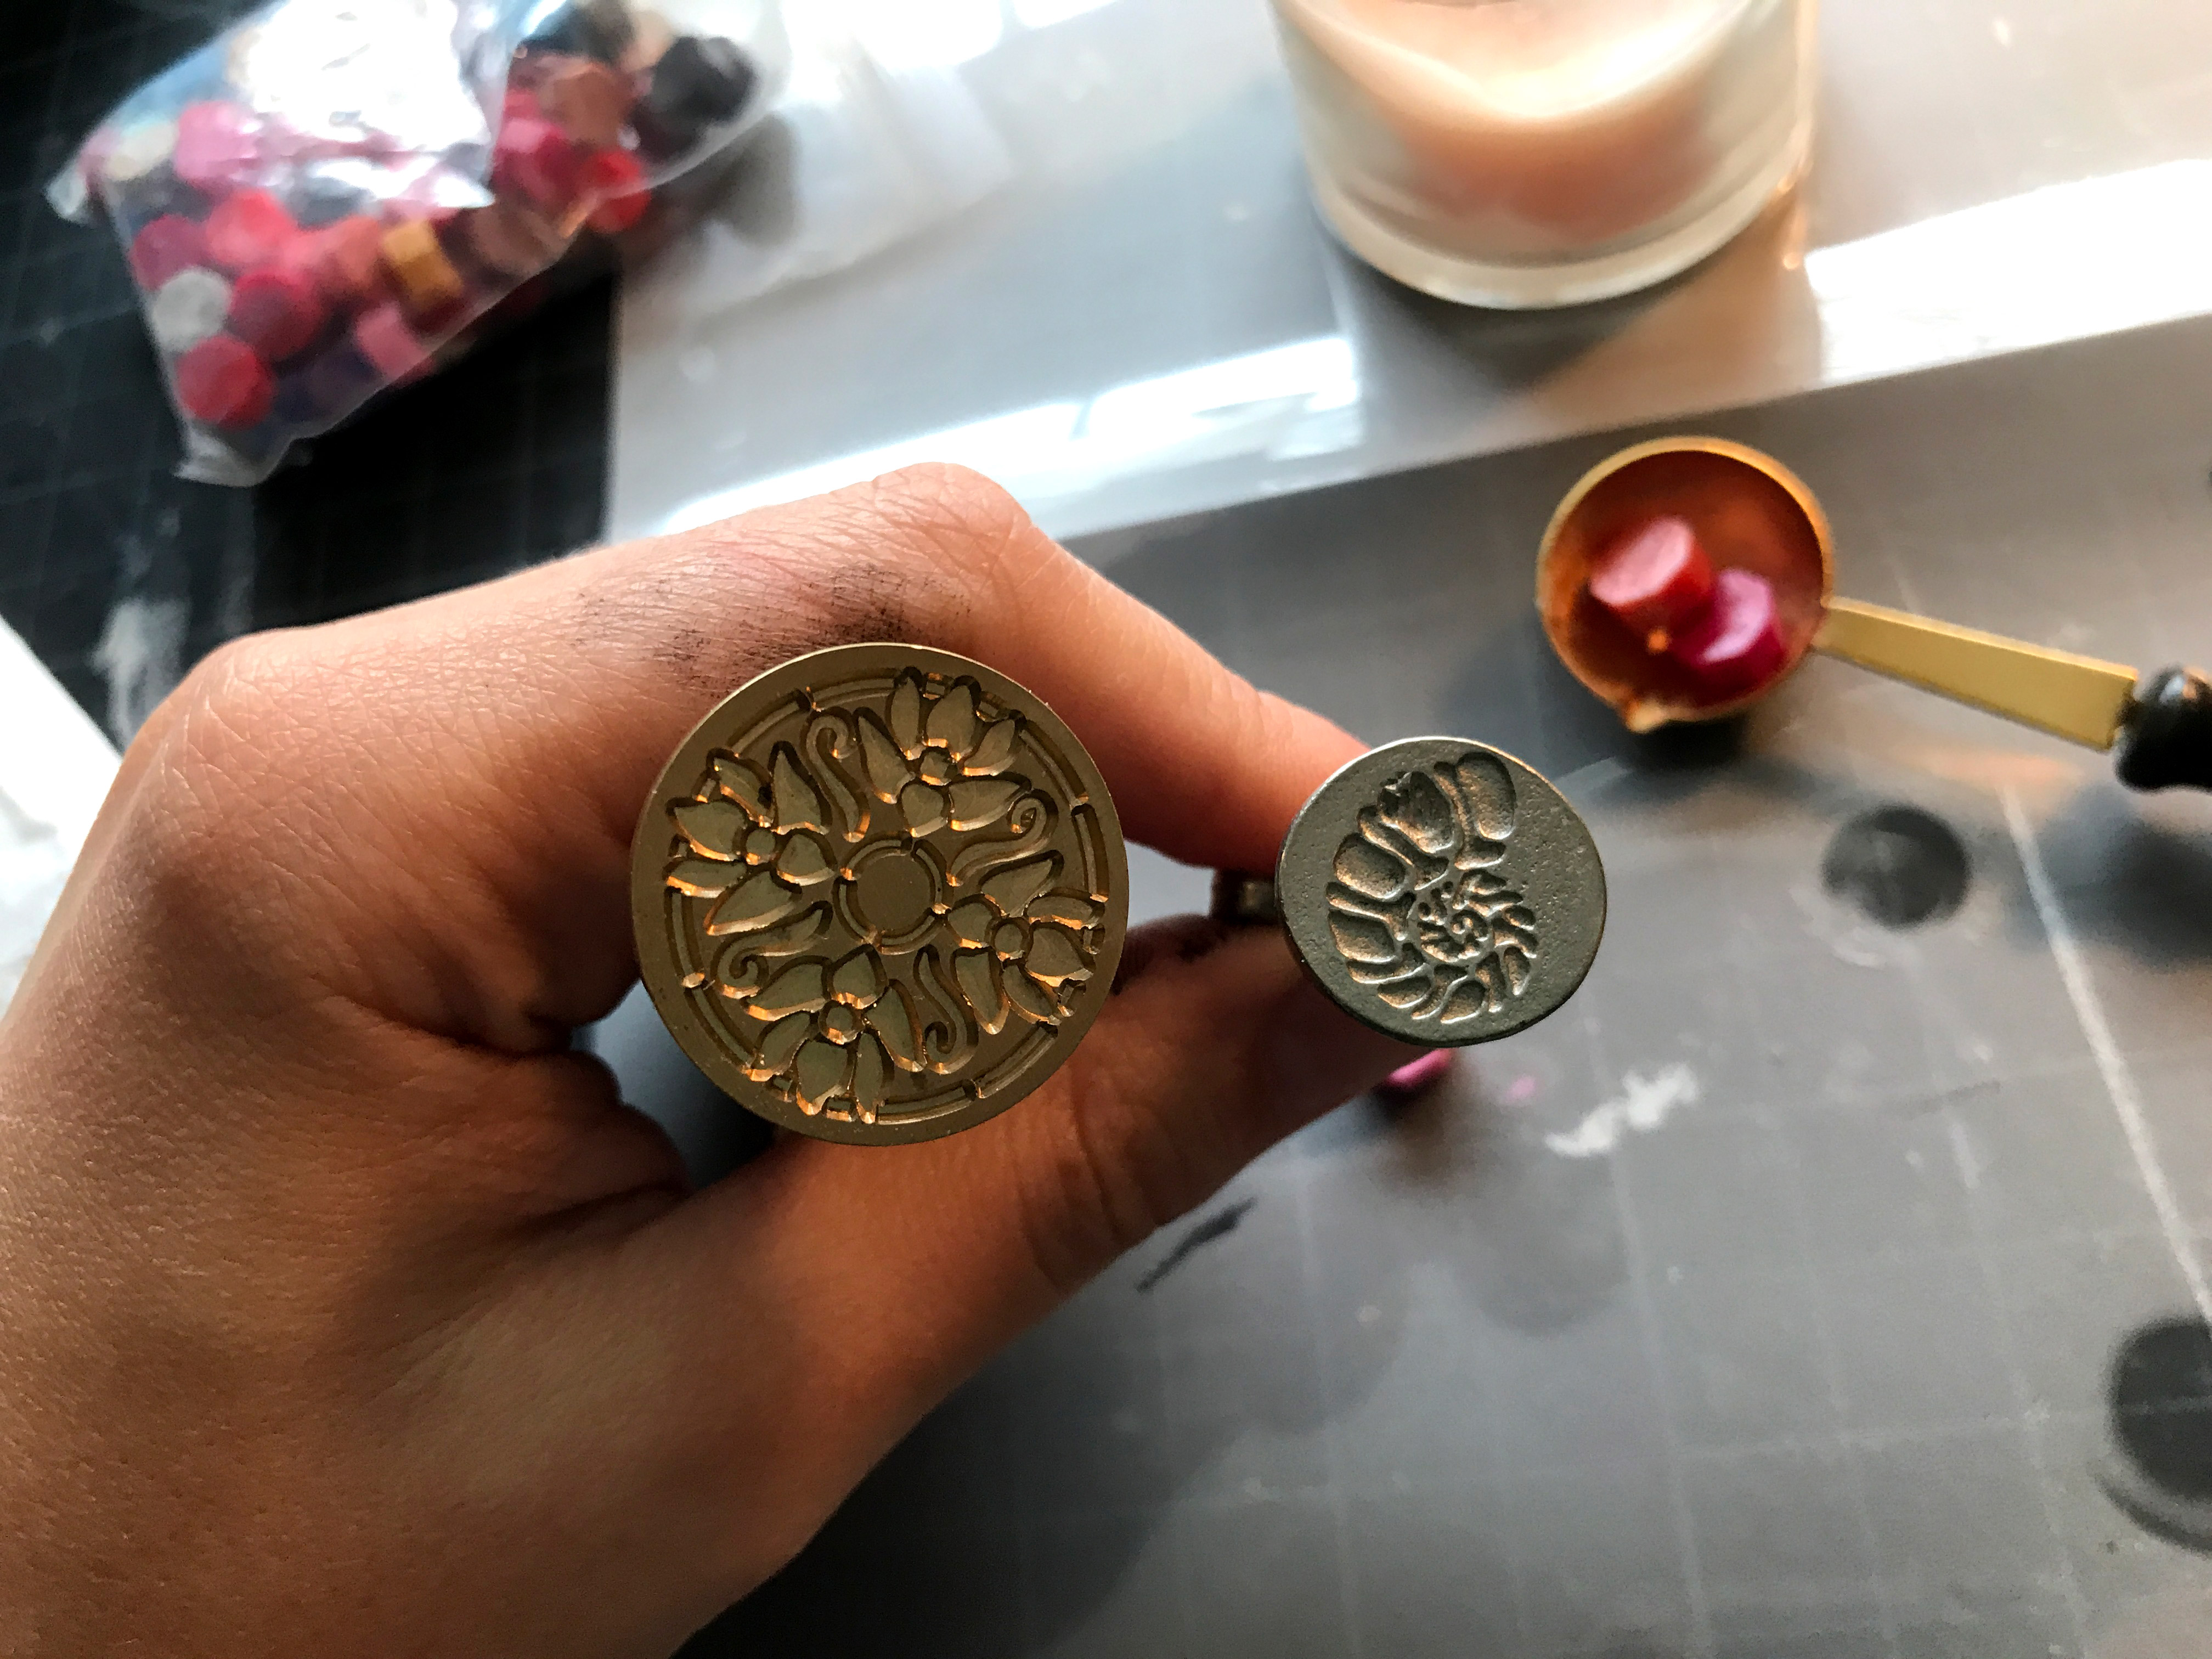 Working with Wax Seals - Can You Make them From Acrylic? - Danielle Wethington